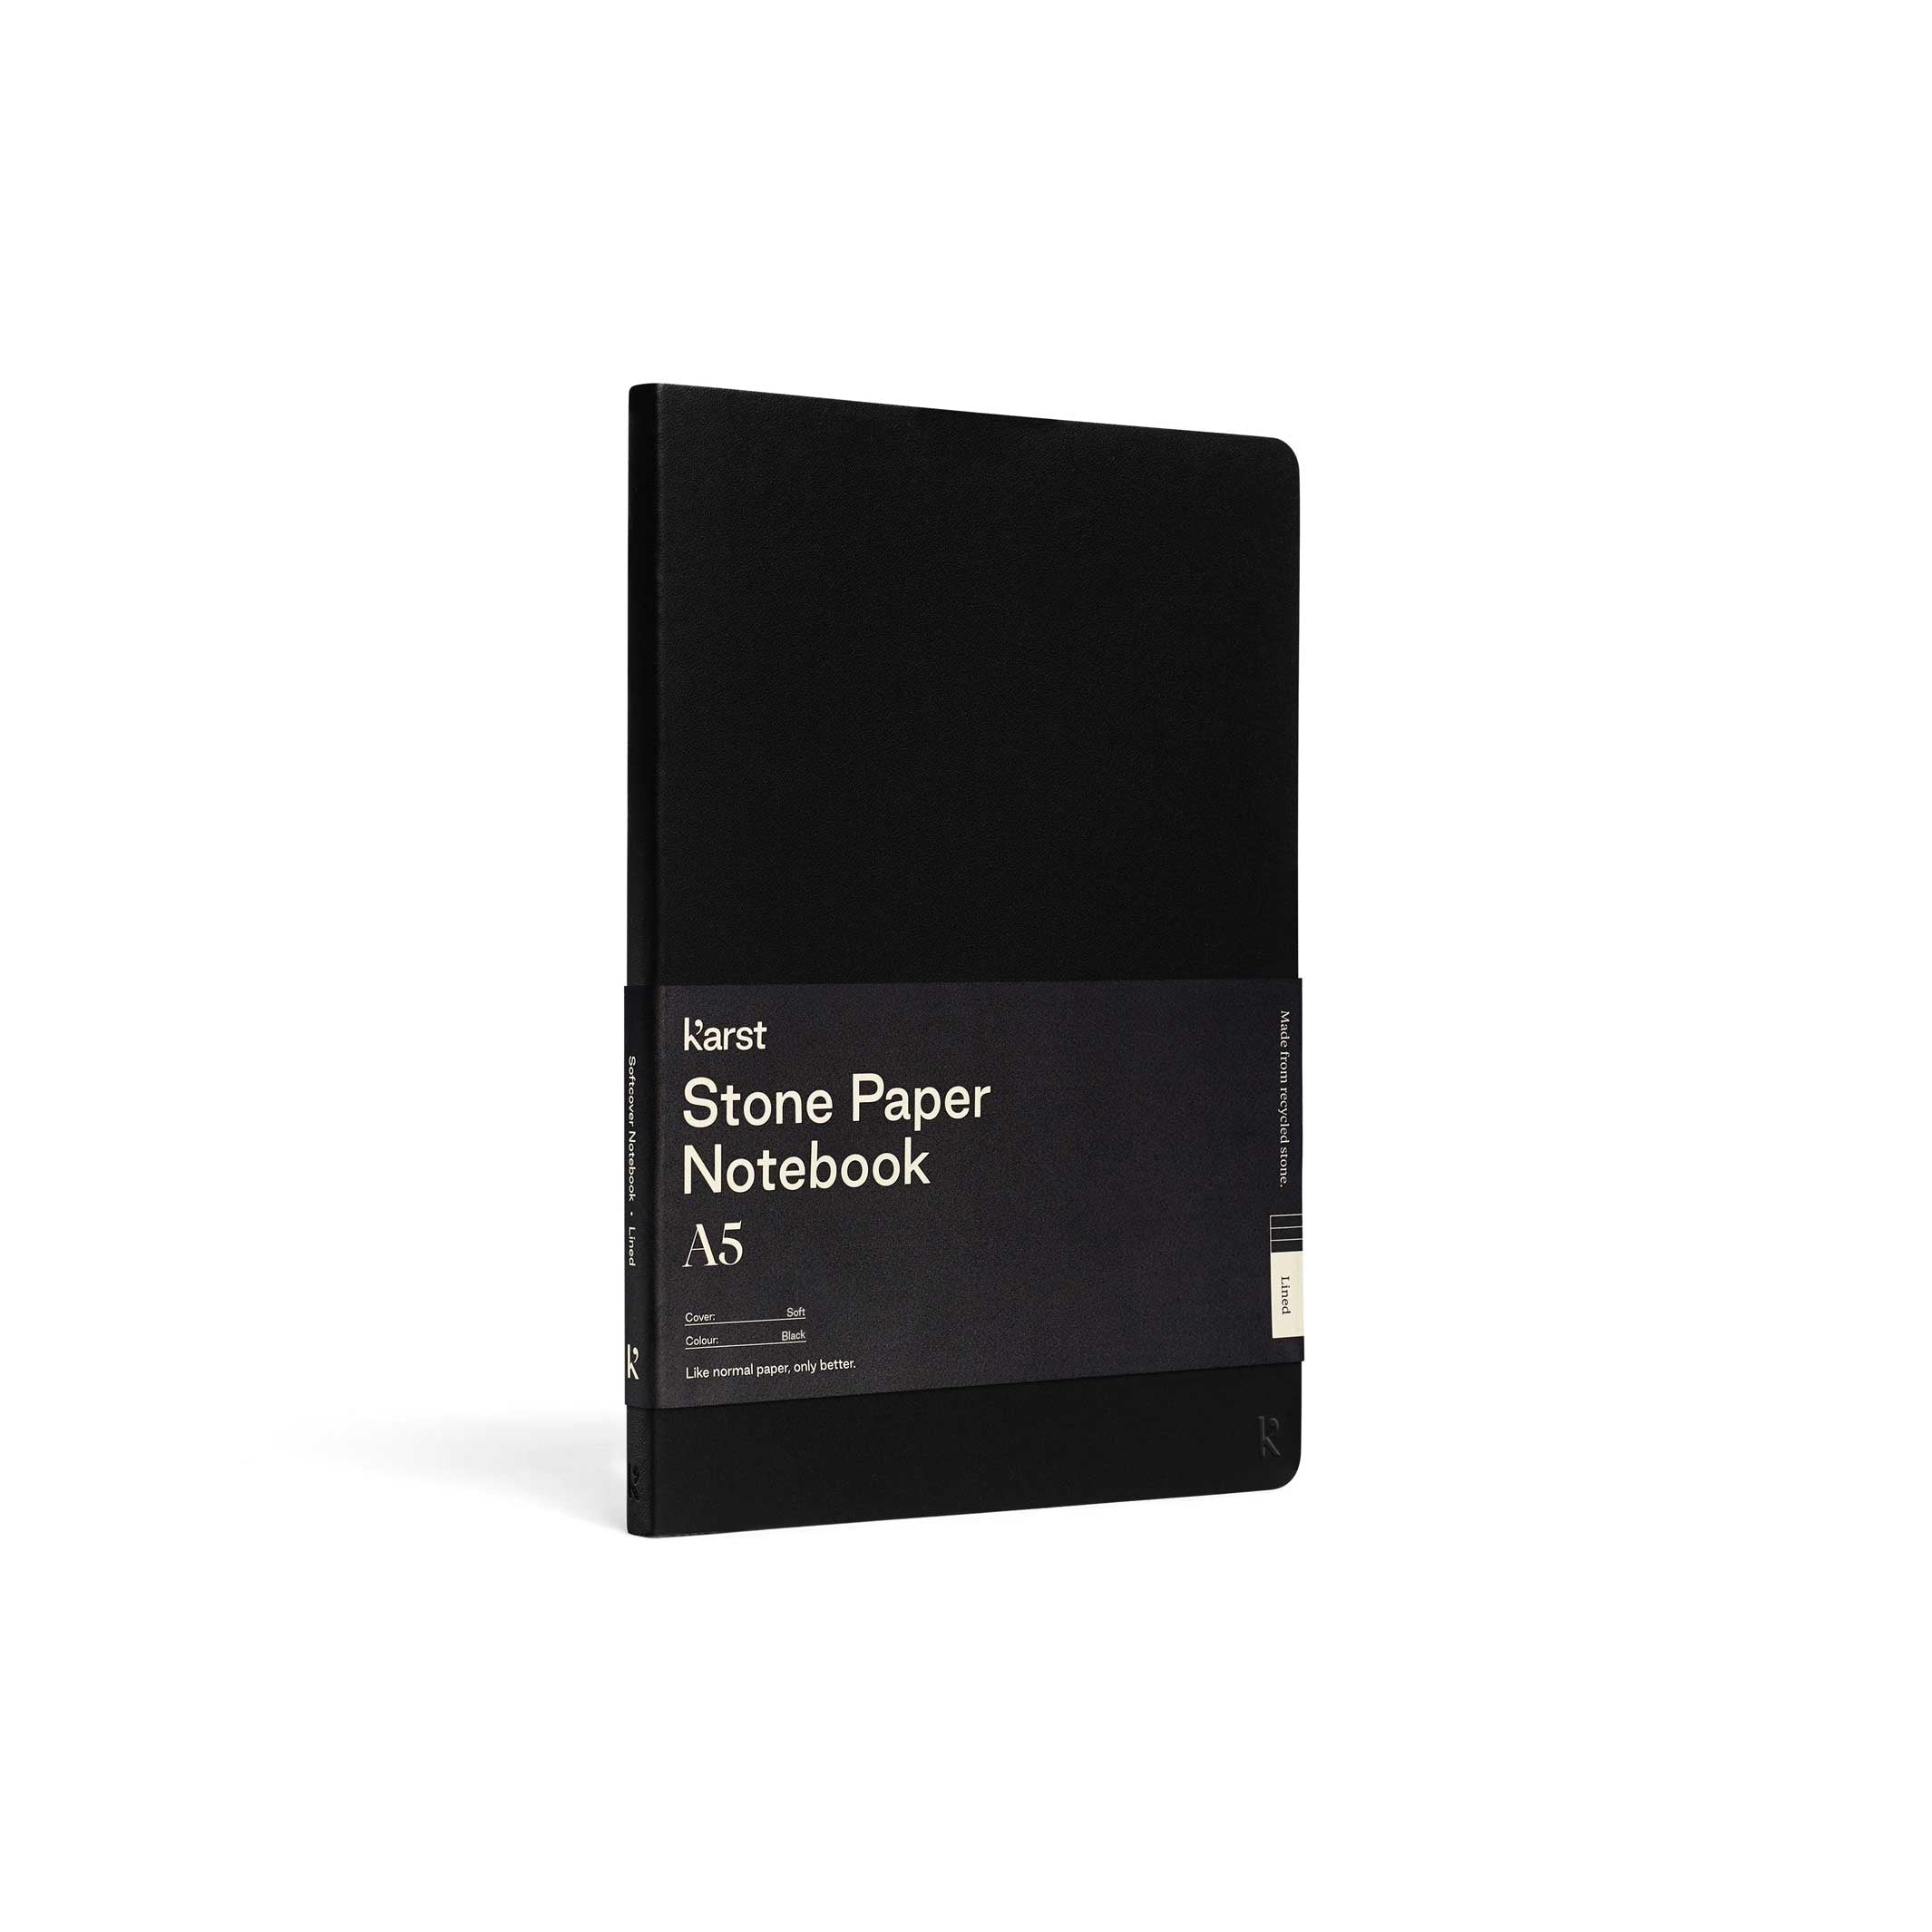 Softcover NOTEBOOK A5 | Black | Karst Stone Paper